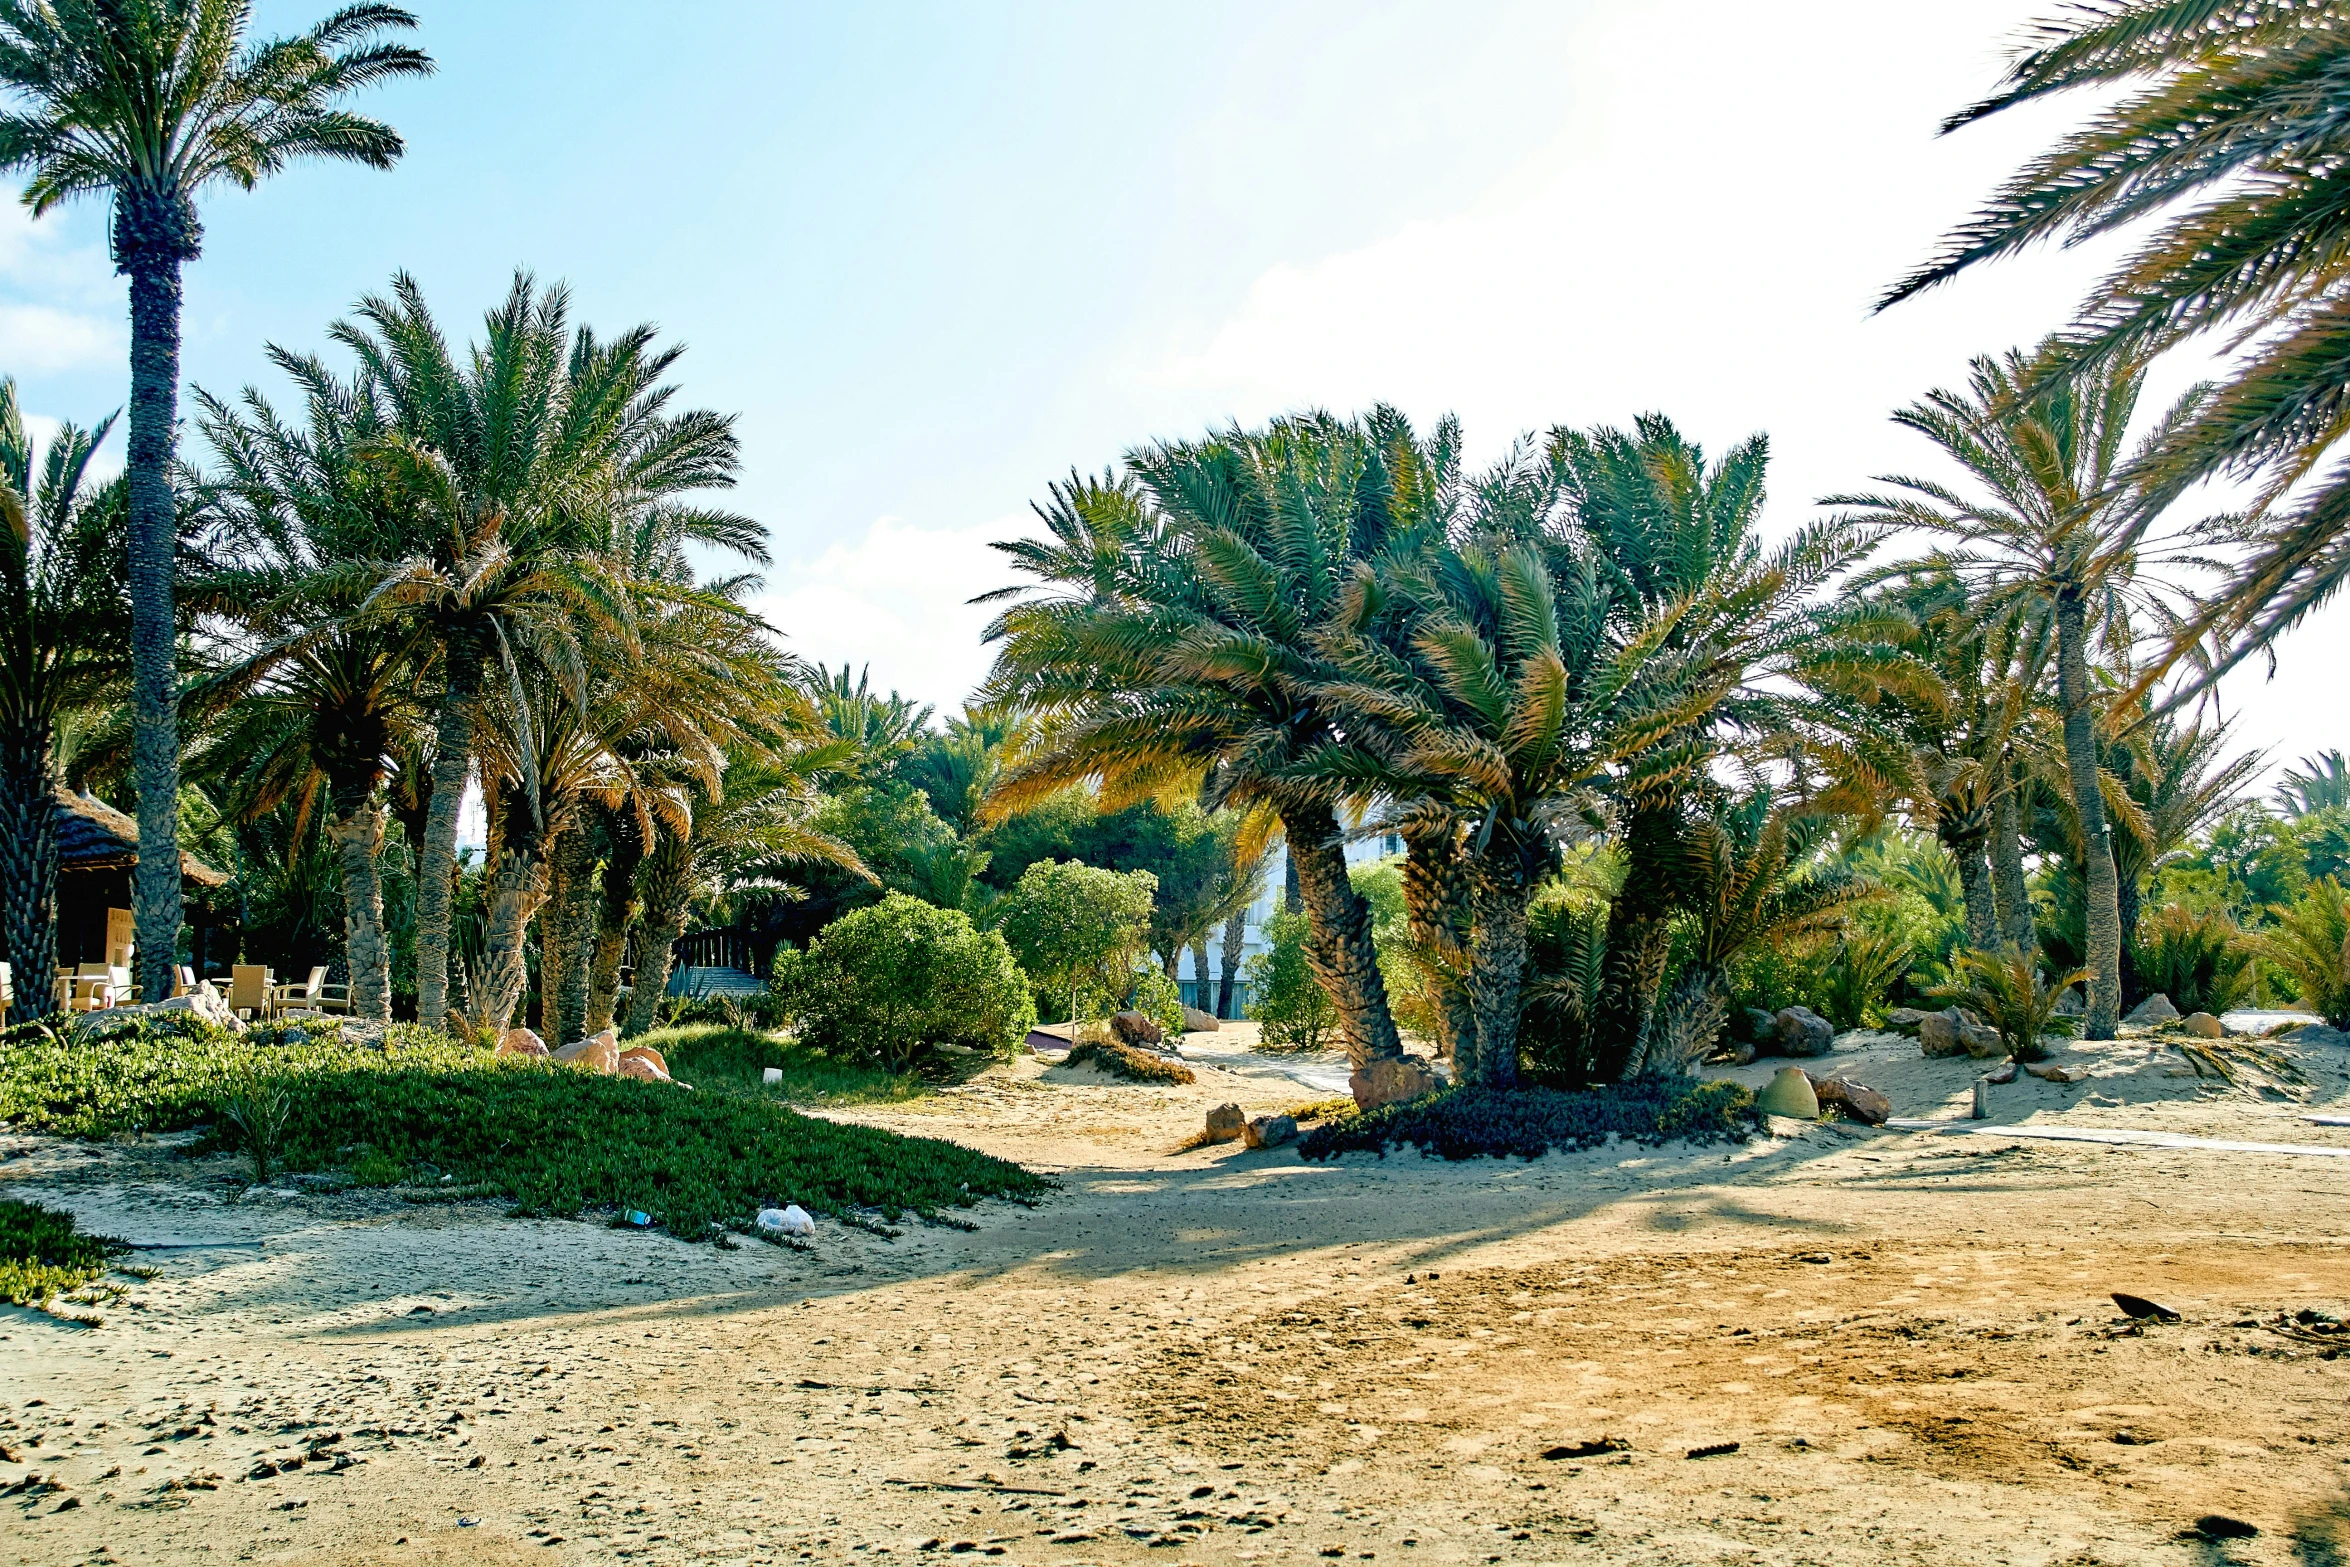 a group of palm trees sitting on top of a sandy beach, by Julia Pishtar, les nabis, mediterranean fisher village, gardening, nature photo